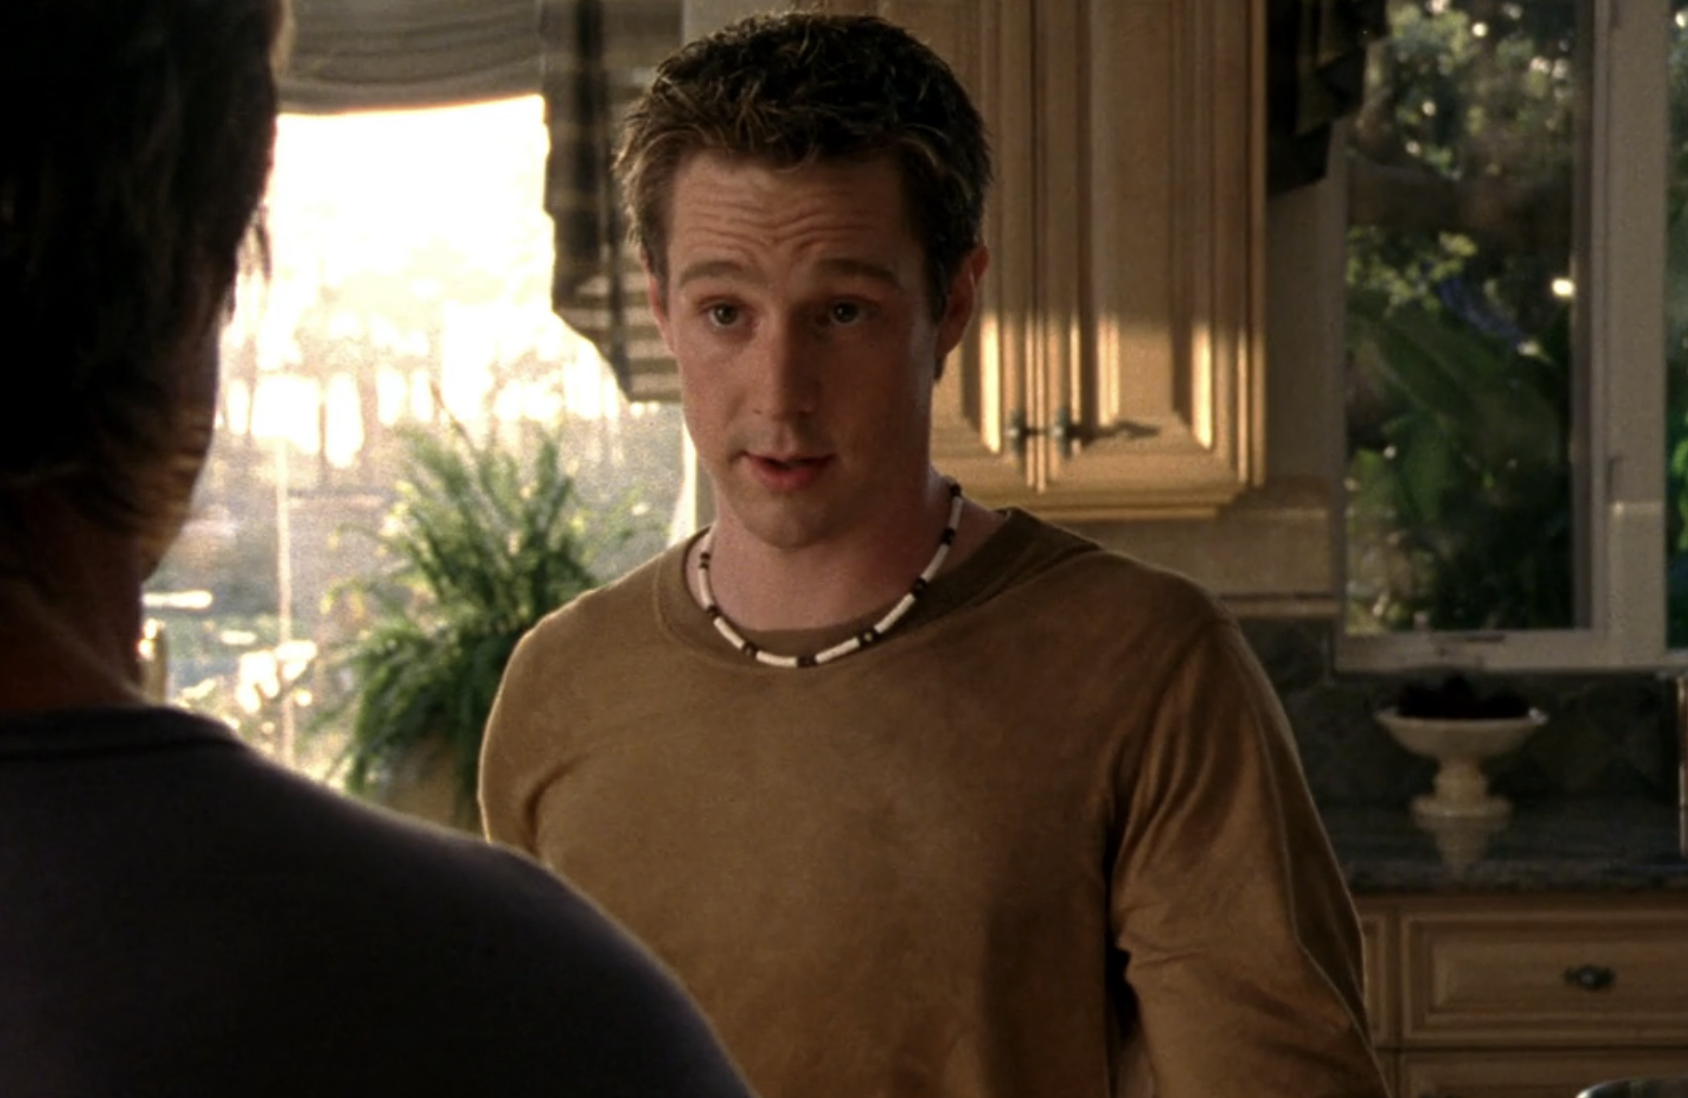 Screenshot from S1E21 of Veronica Mars. Logan is in his kitchen, wearing a brown long-sleeve tee and puka shell necklass. His eyebrows are rasied, he's in converastion with Aaron, whose back is to us.